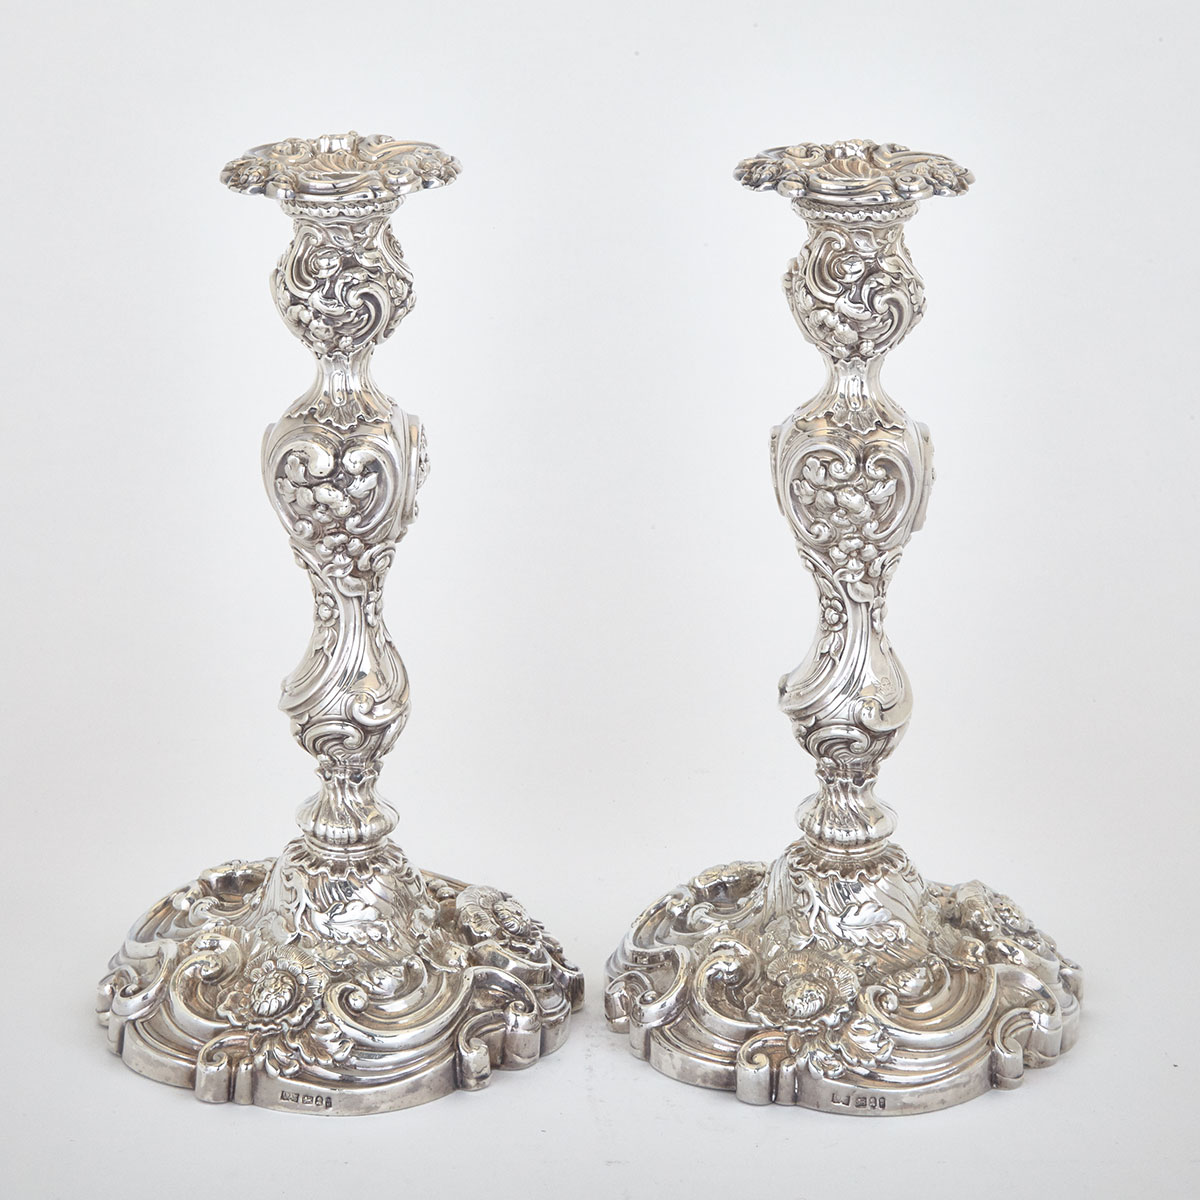 Pair of George IV Silver Table Candlesticks, Waterhouse, Hodson & Co., Sheffield, 1823